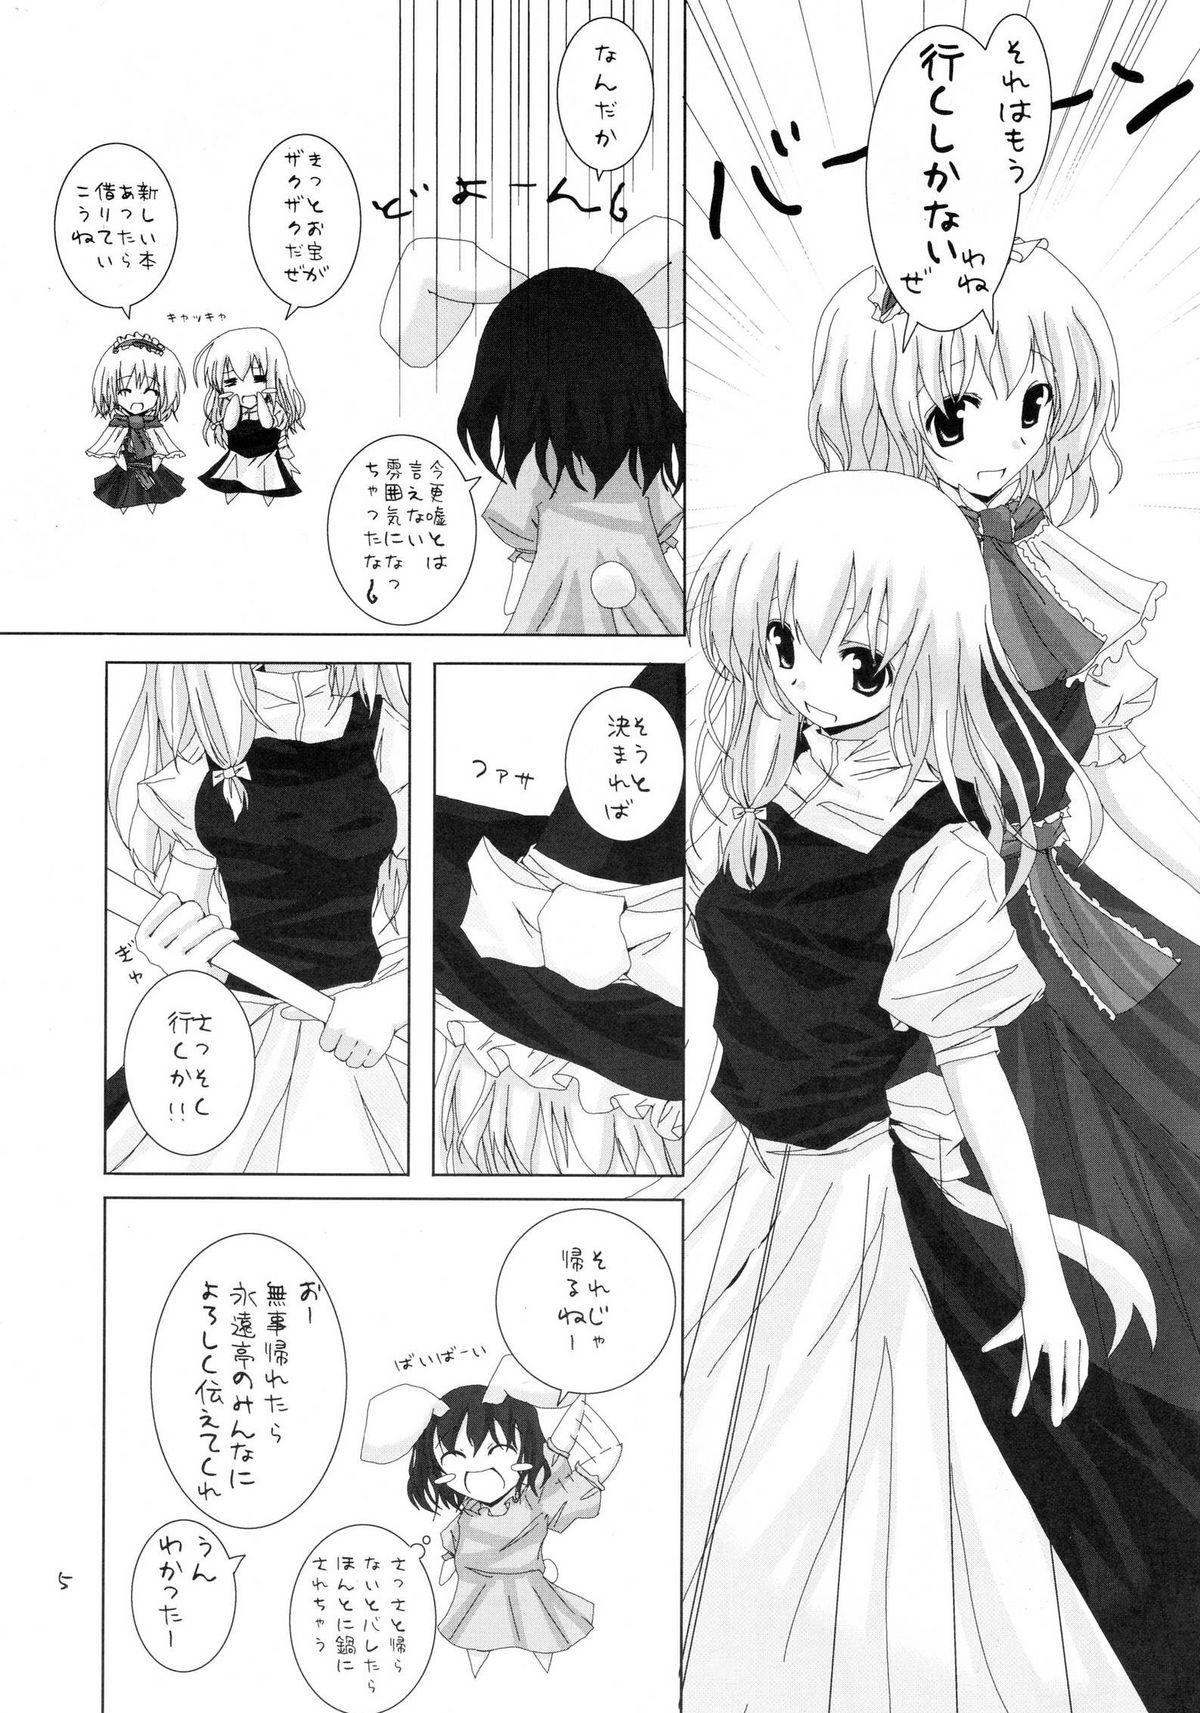 Class Room Gensou Kitan II - Touhou project Exhibitionist - Page 6